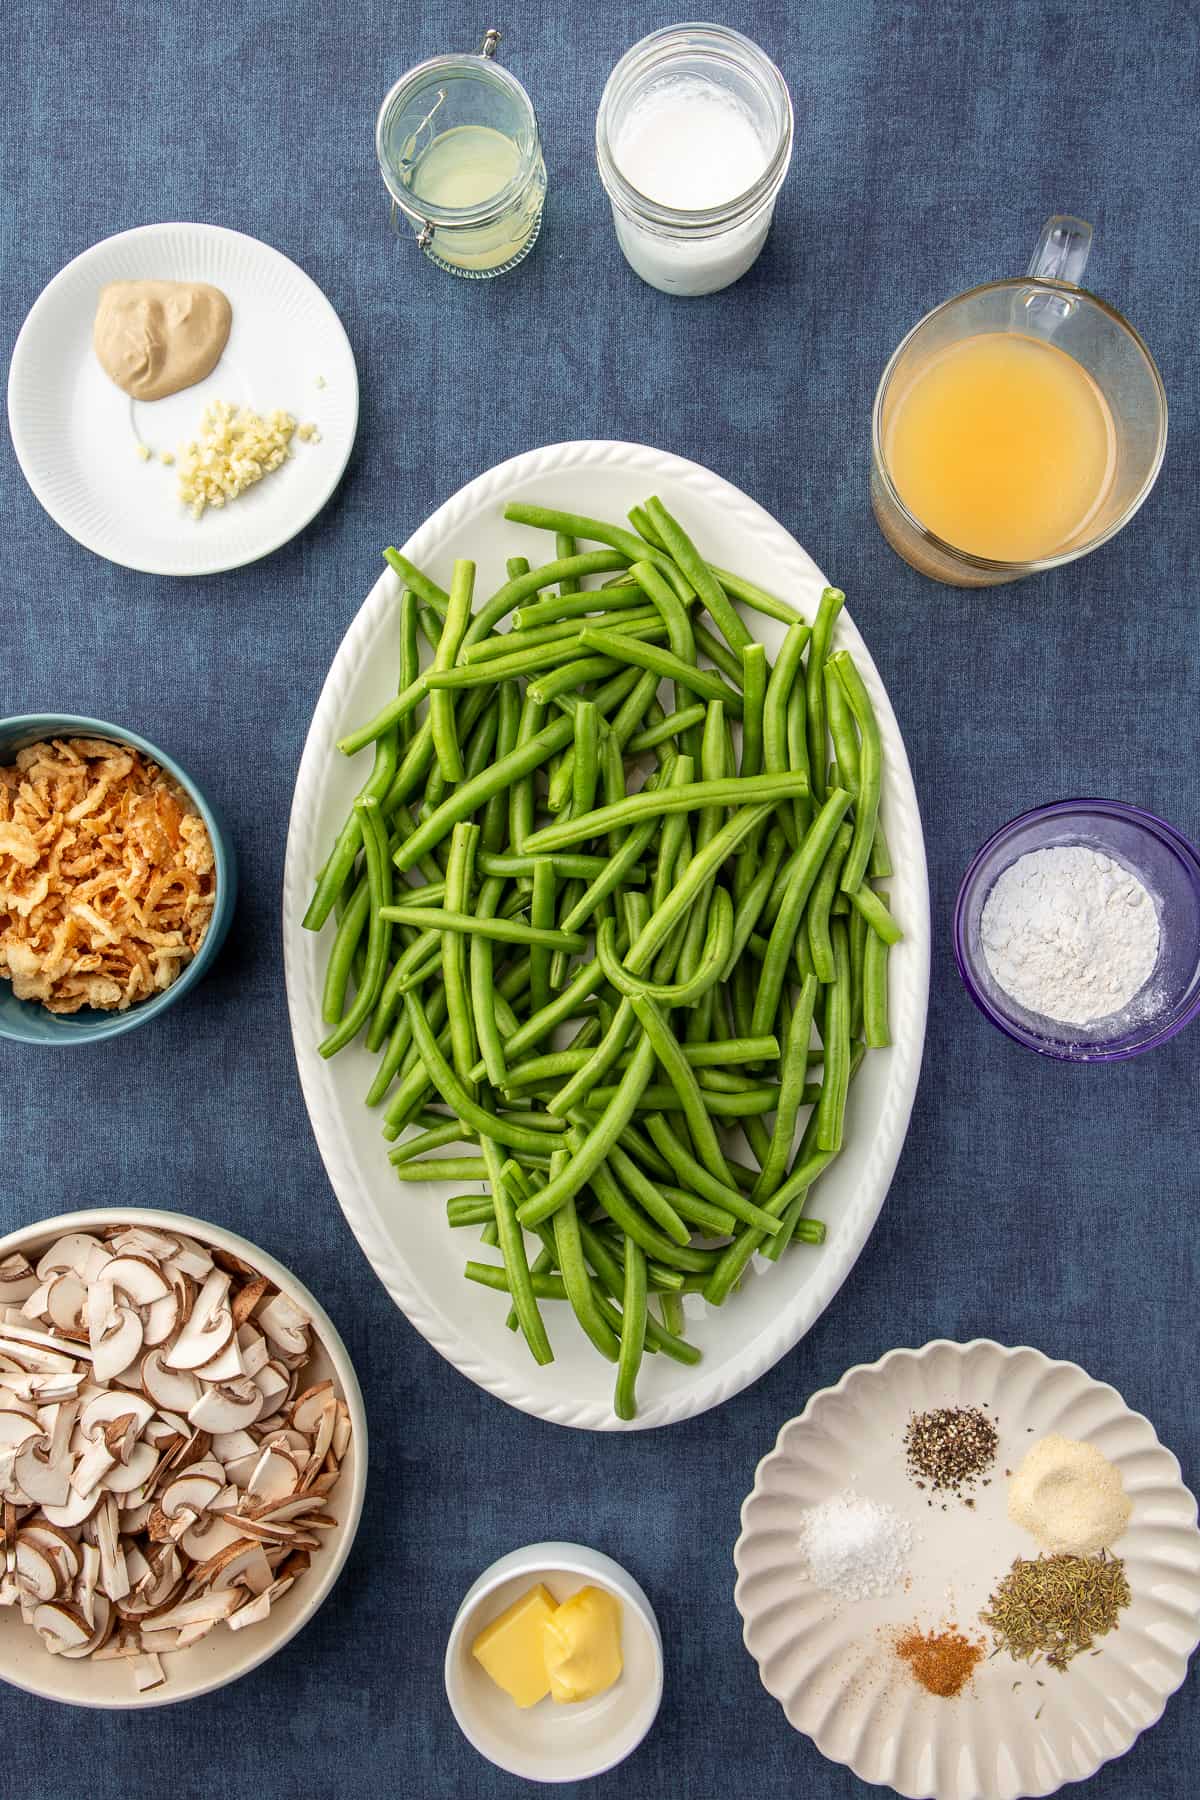 Ingredients for Homemade Green Bean Casserole scattered on dark background.